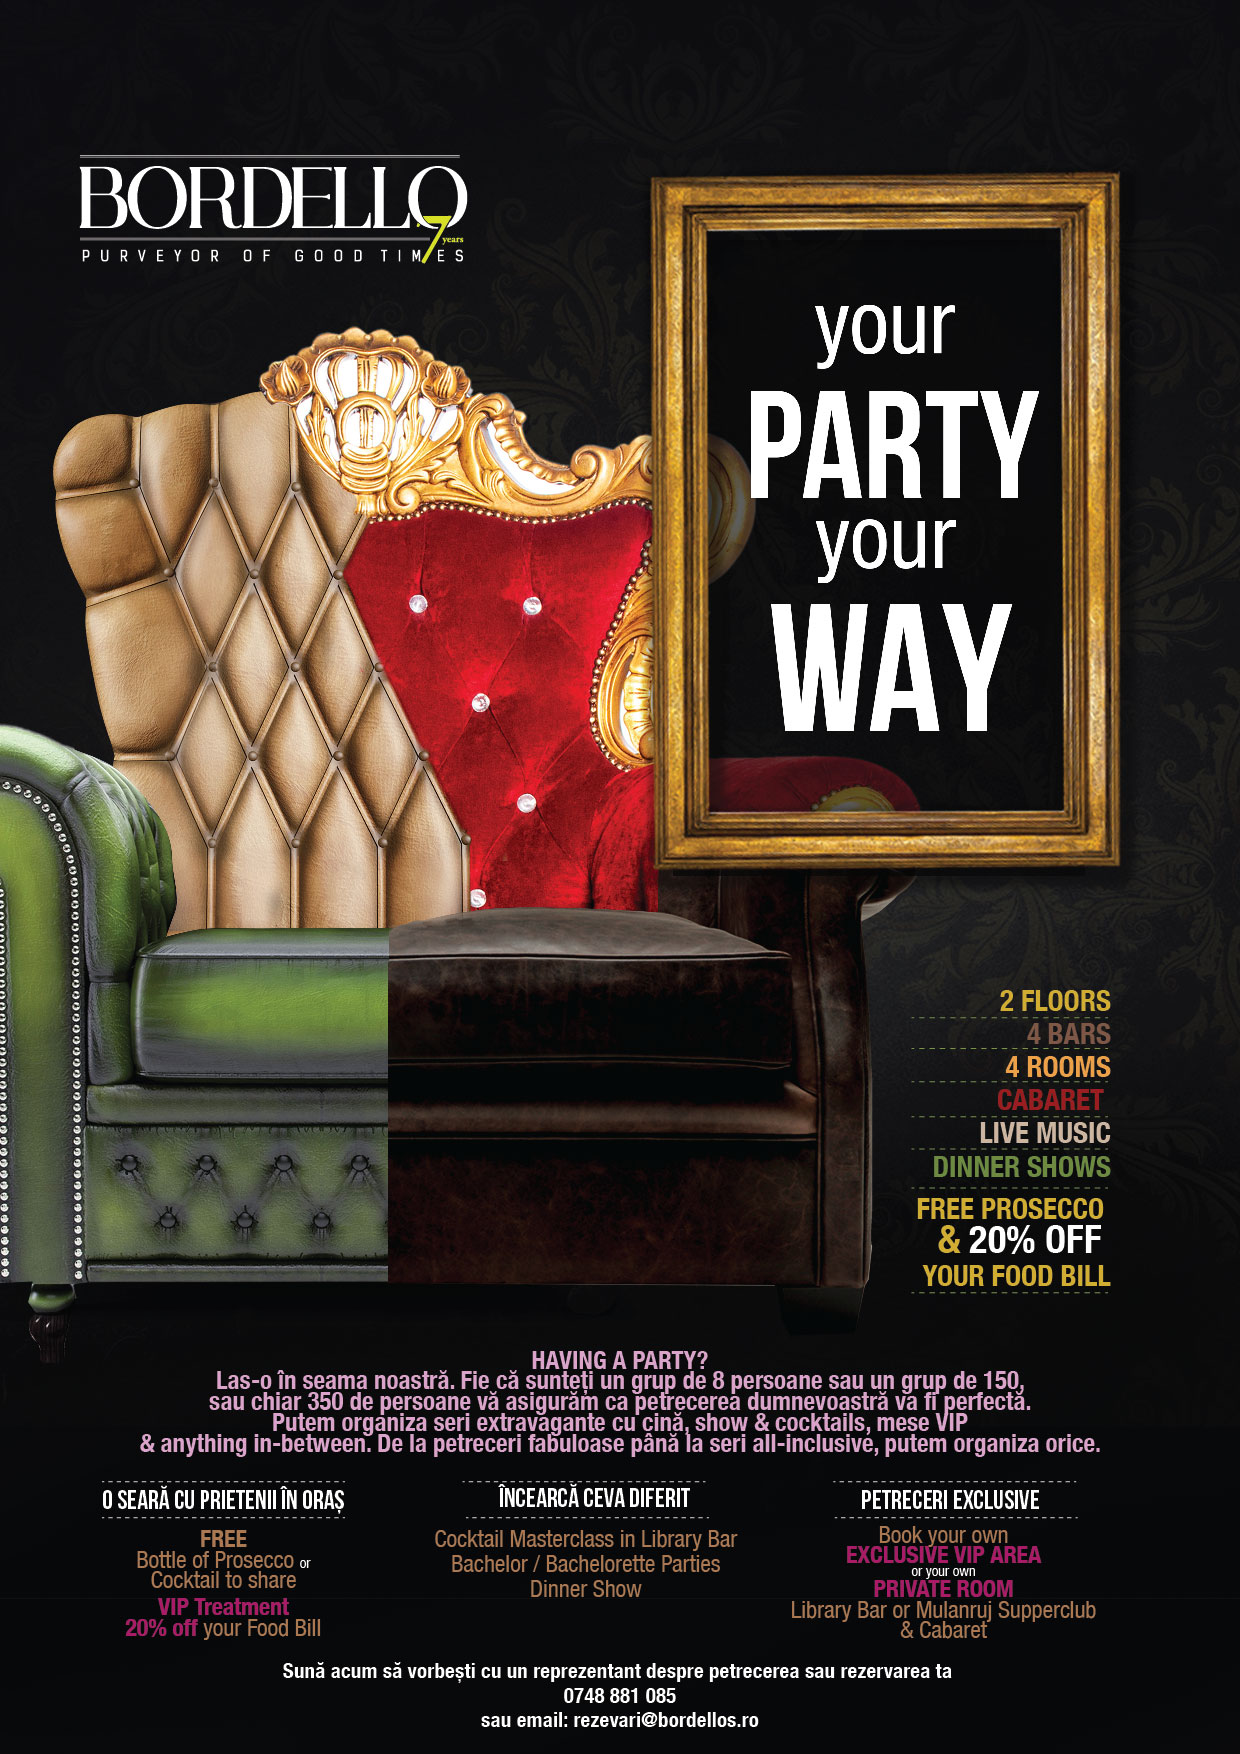 Your Party Your Way